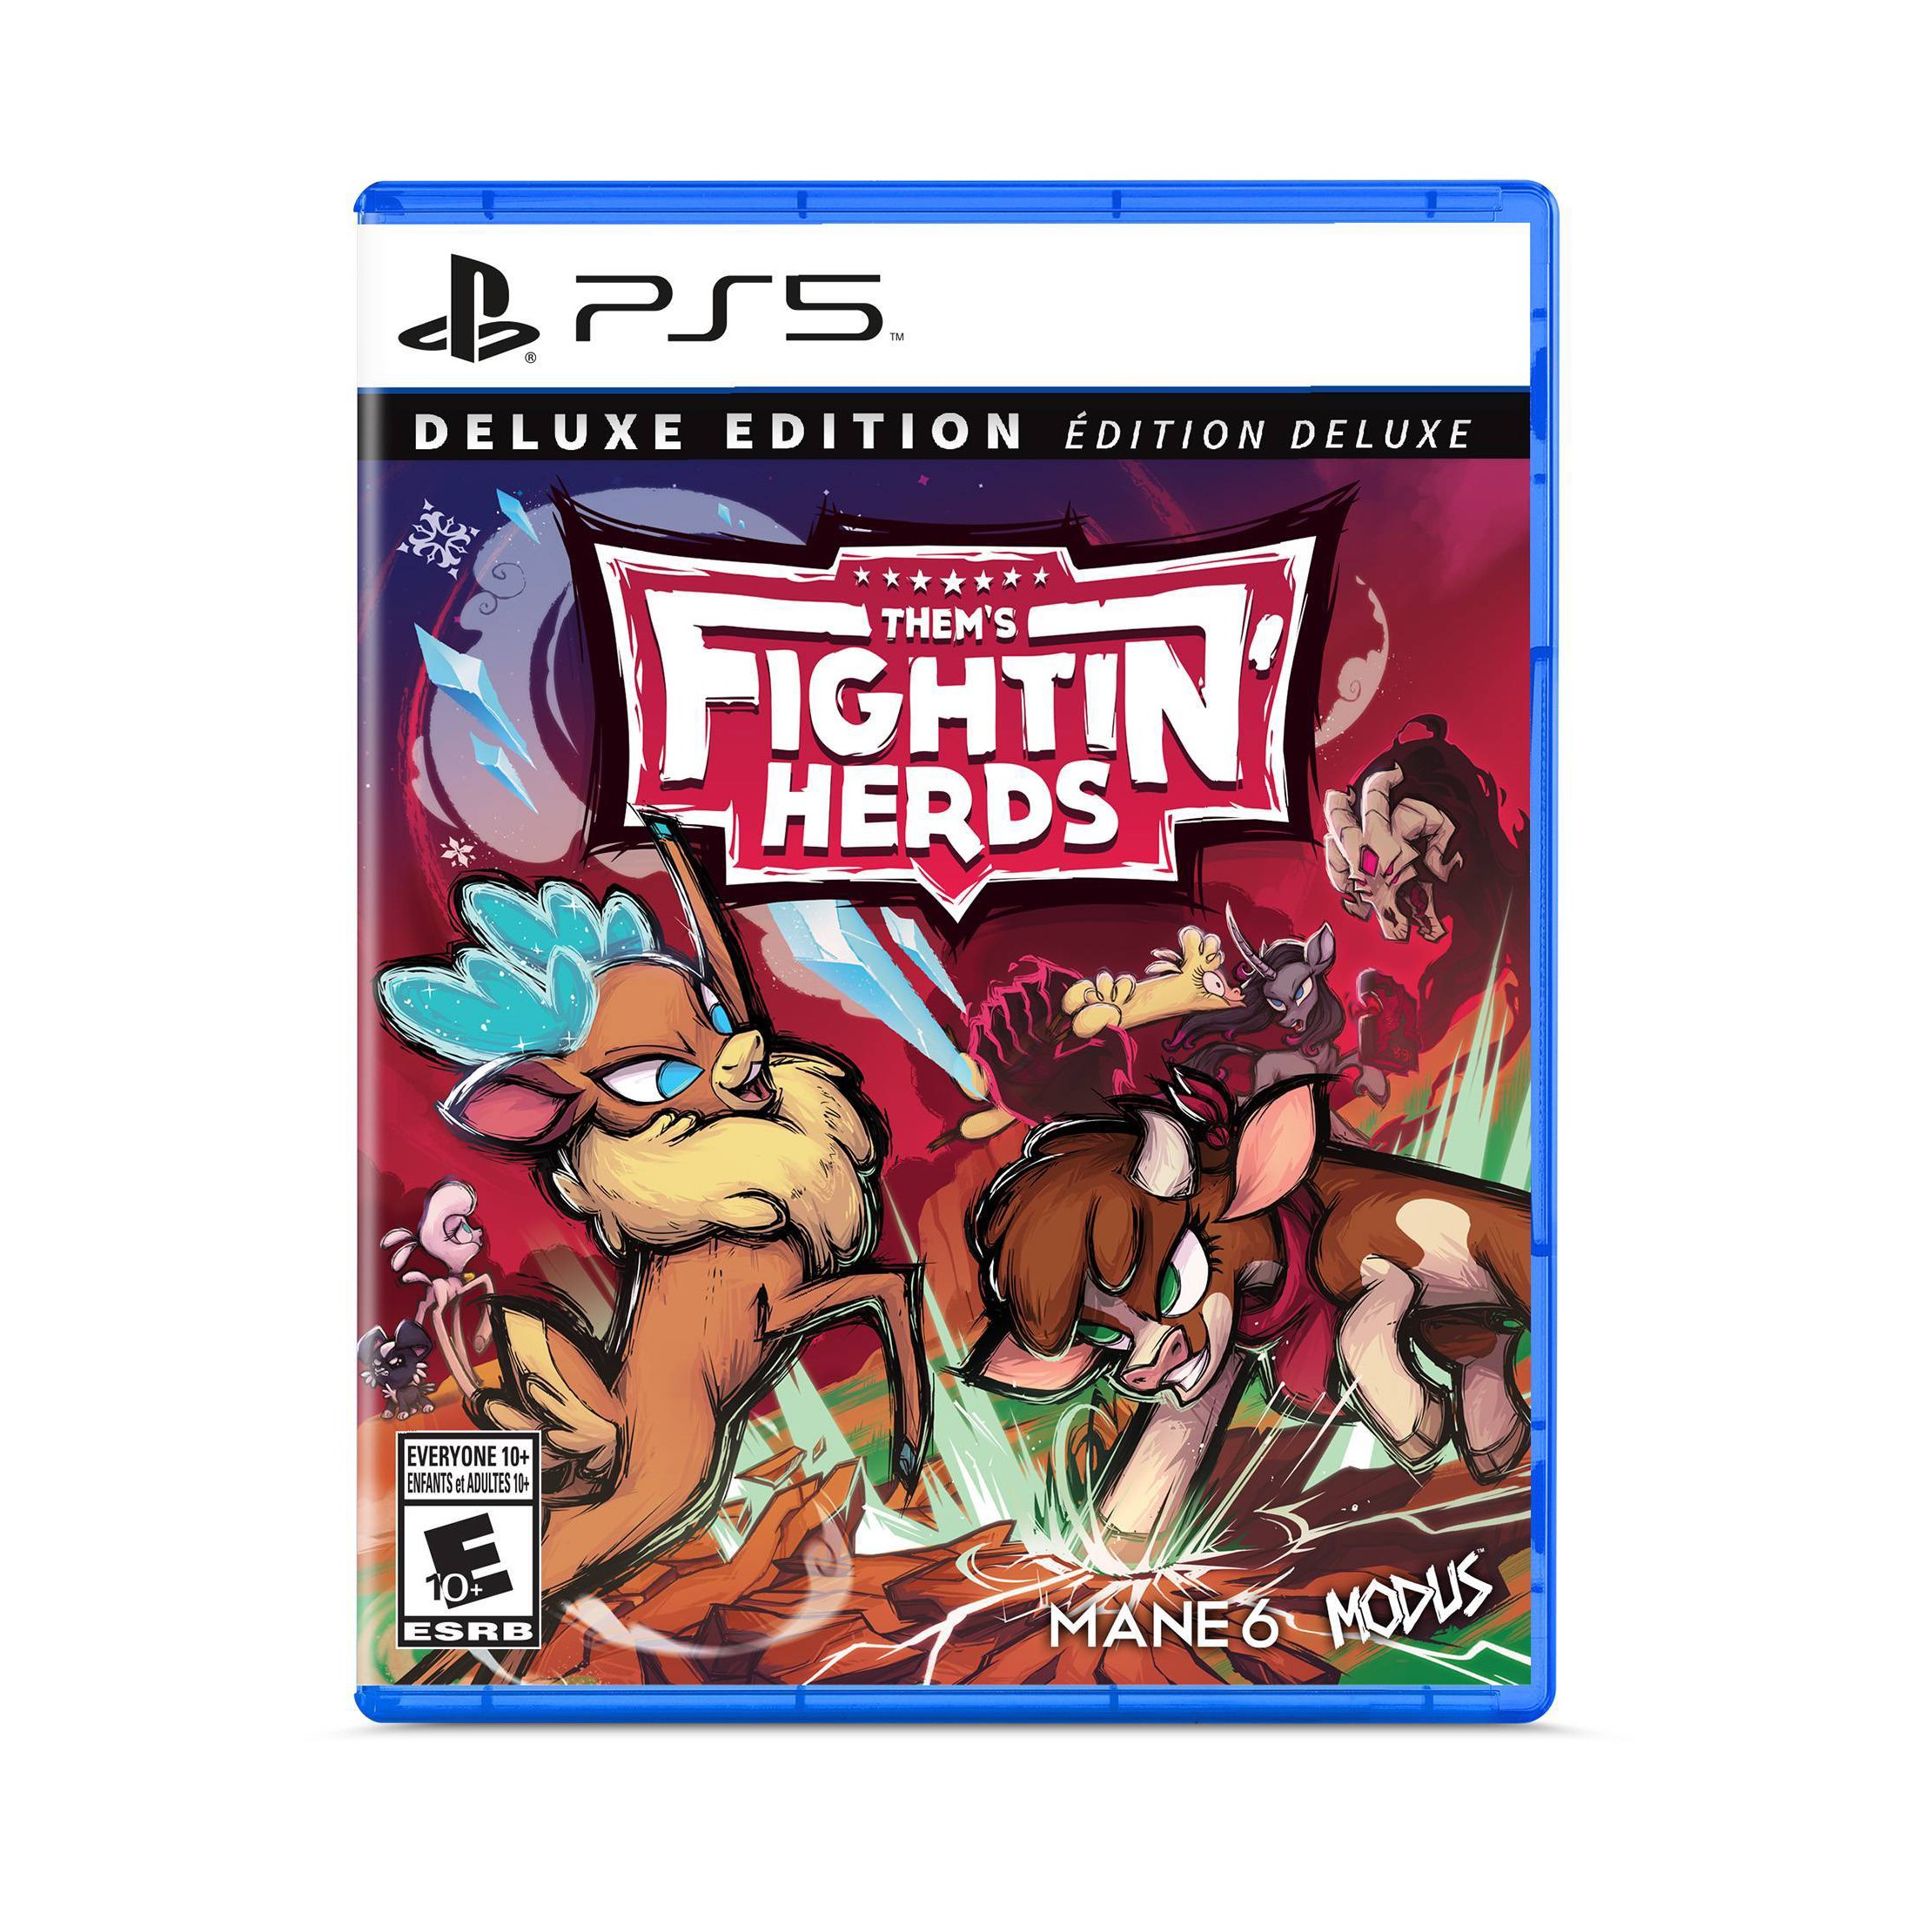 Them's Fightin' Herds: Deluxe Edition - $30.99 at Target